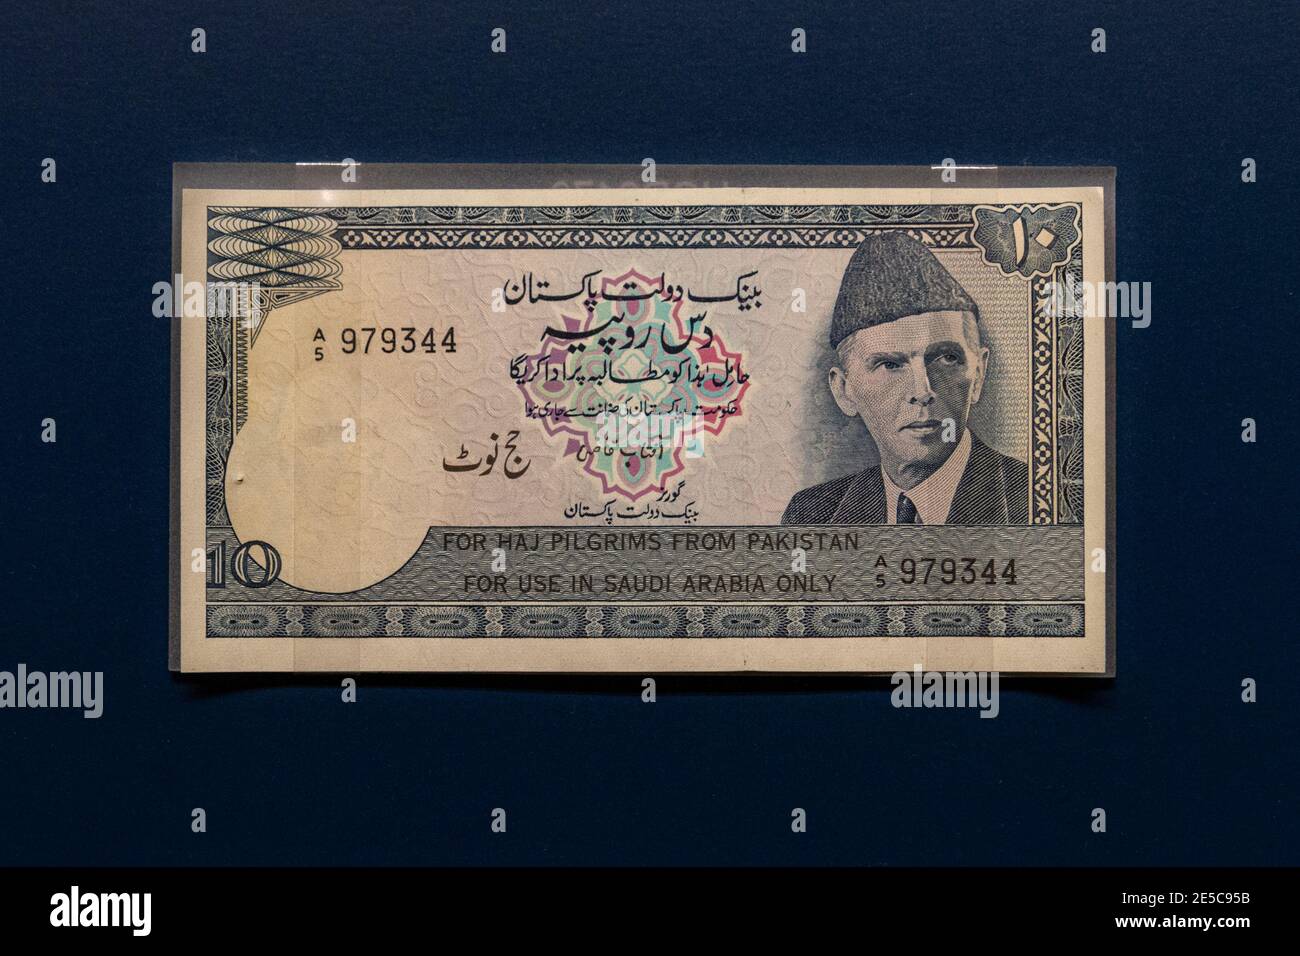 A 10 Rupee note issued by the Government of Pakistan for the Hajj Pilgrimage (to be used in Saudi Arabia, Money Gallery, Ashmolean Museum, Oxford, UK. Stock Photo